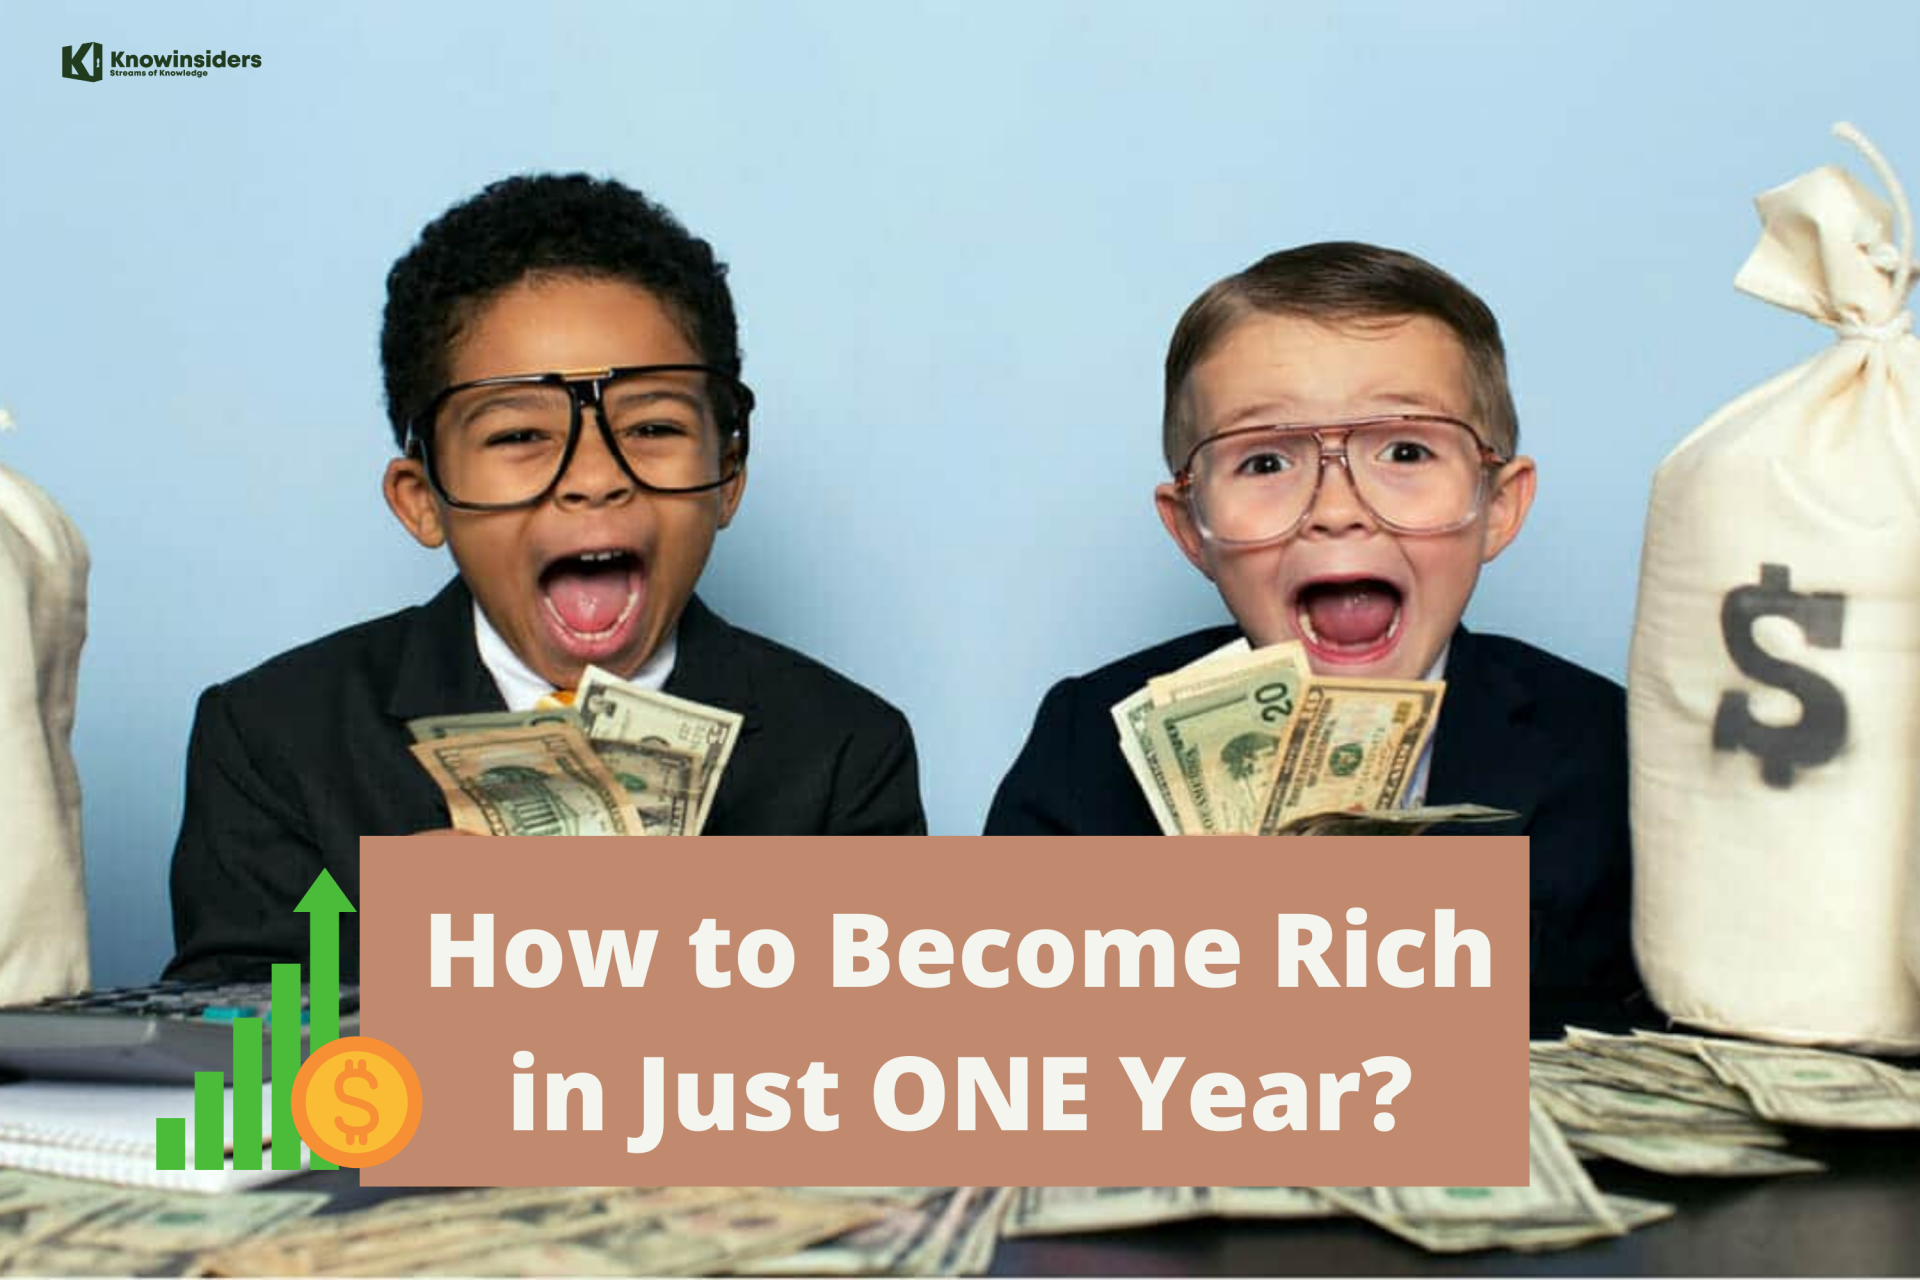 How to Become Rich in ONE Year